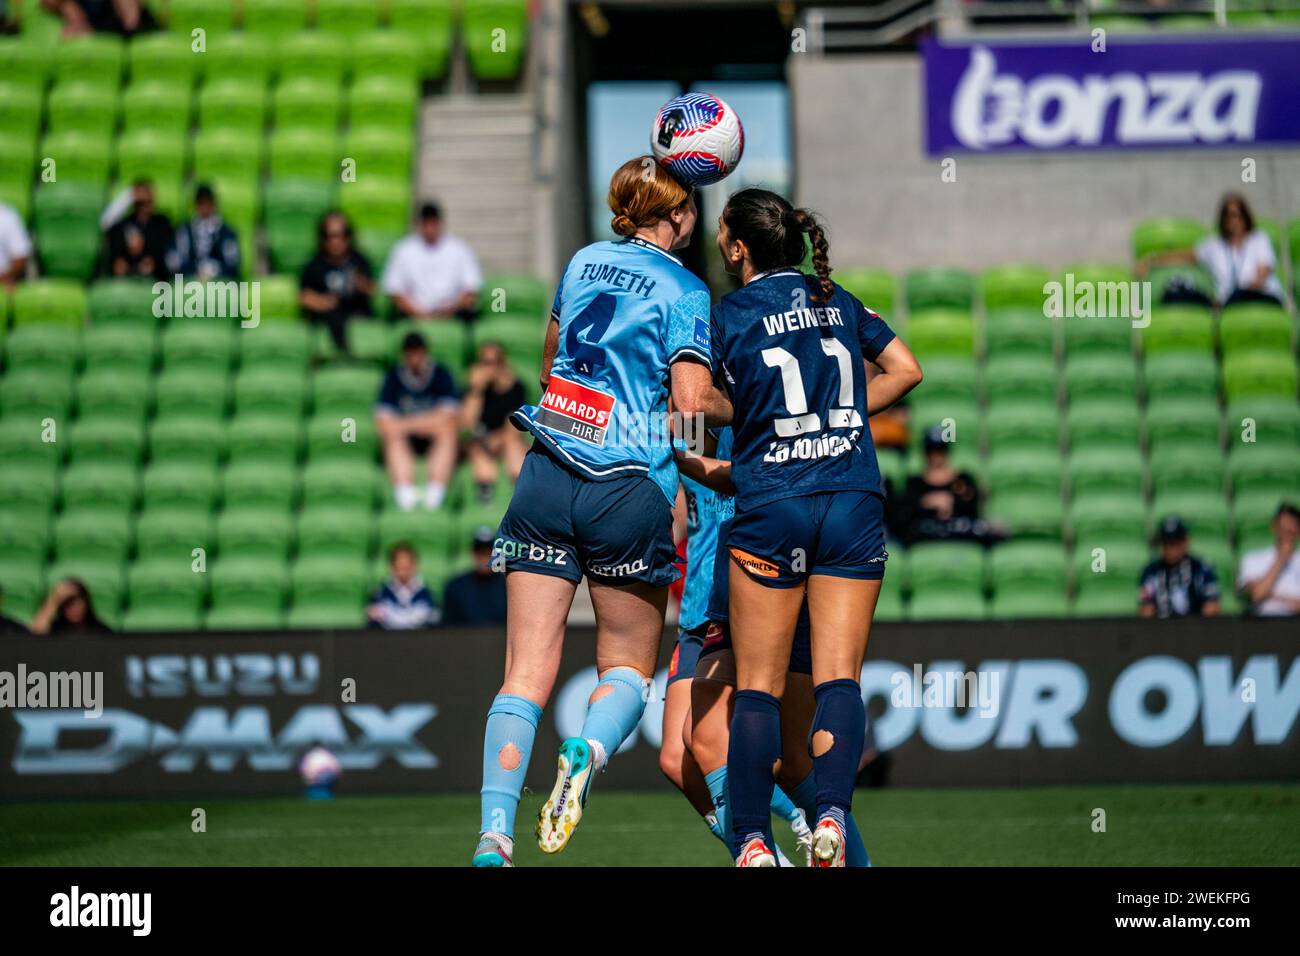 Melbourne, Australia. 26 January, 2024. Left to Right: Sydney FC Defender Tori Tumeth (#4) and Melbourne Victory FC Forward McKenzie Weinert (#11) compete for a header in the box during the Liberty A-League Women’s match between Melbourne Victory FC and Sydney FC at AAMI Park in Melbourne, Australia. Credit: James Forrester/Alamy Live News Stock Photo